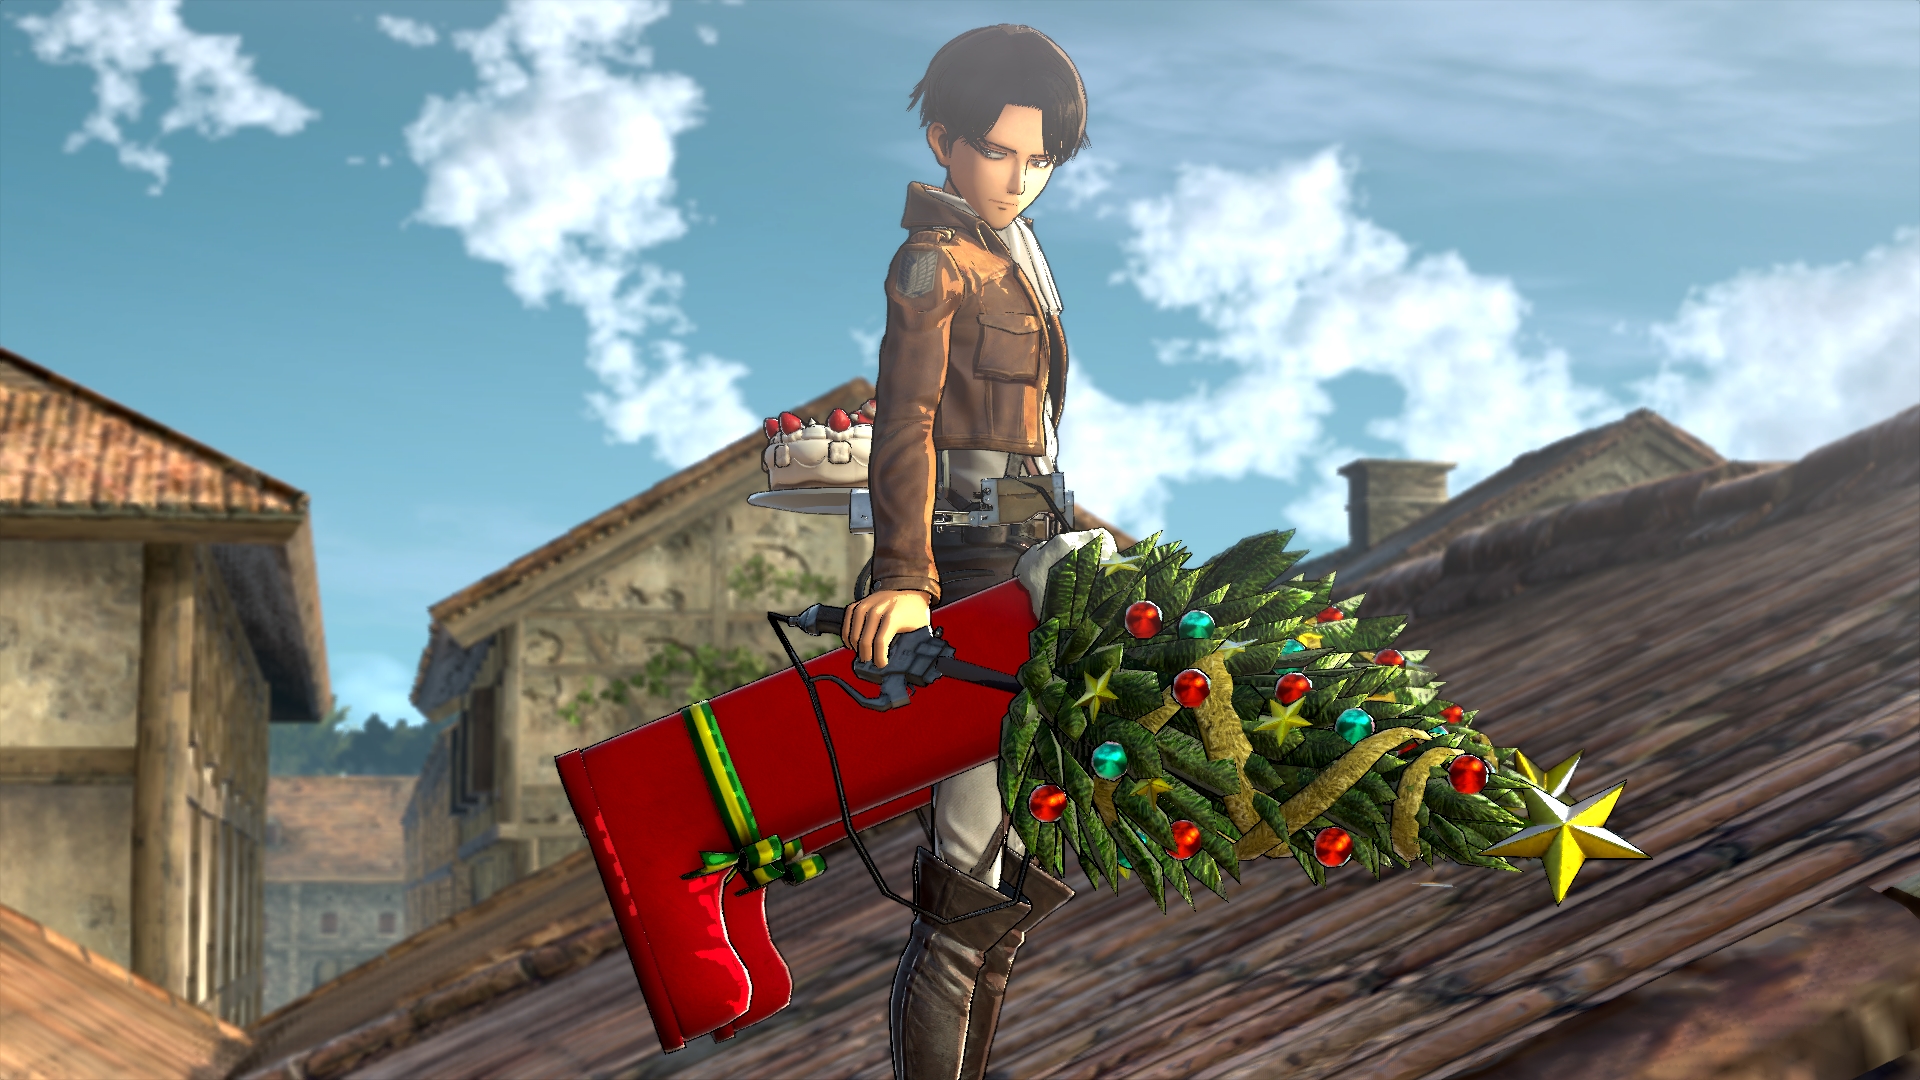 Attack on Titan - Weapon - Christmas Featured Screenshot #1